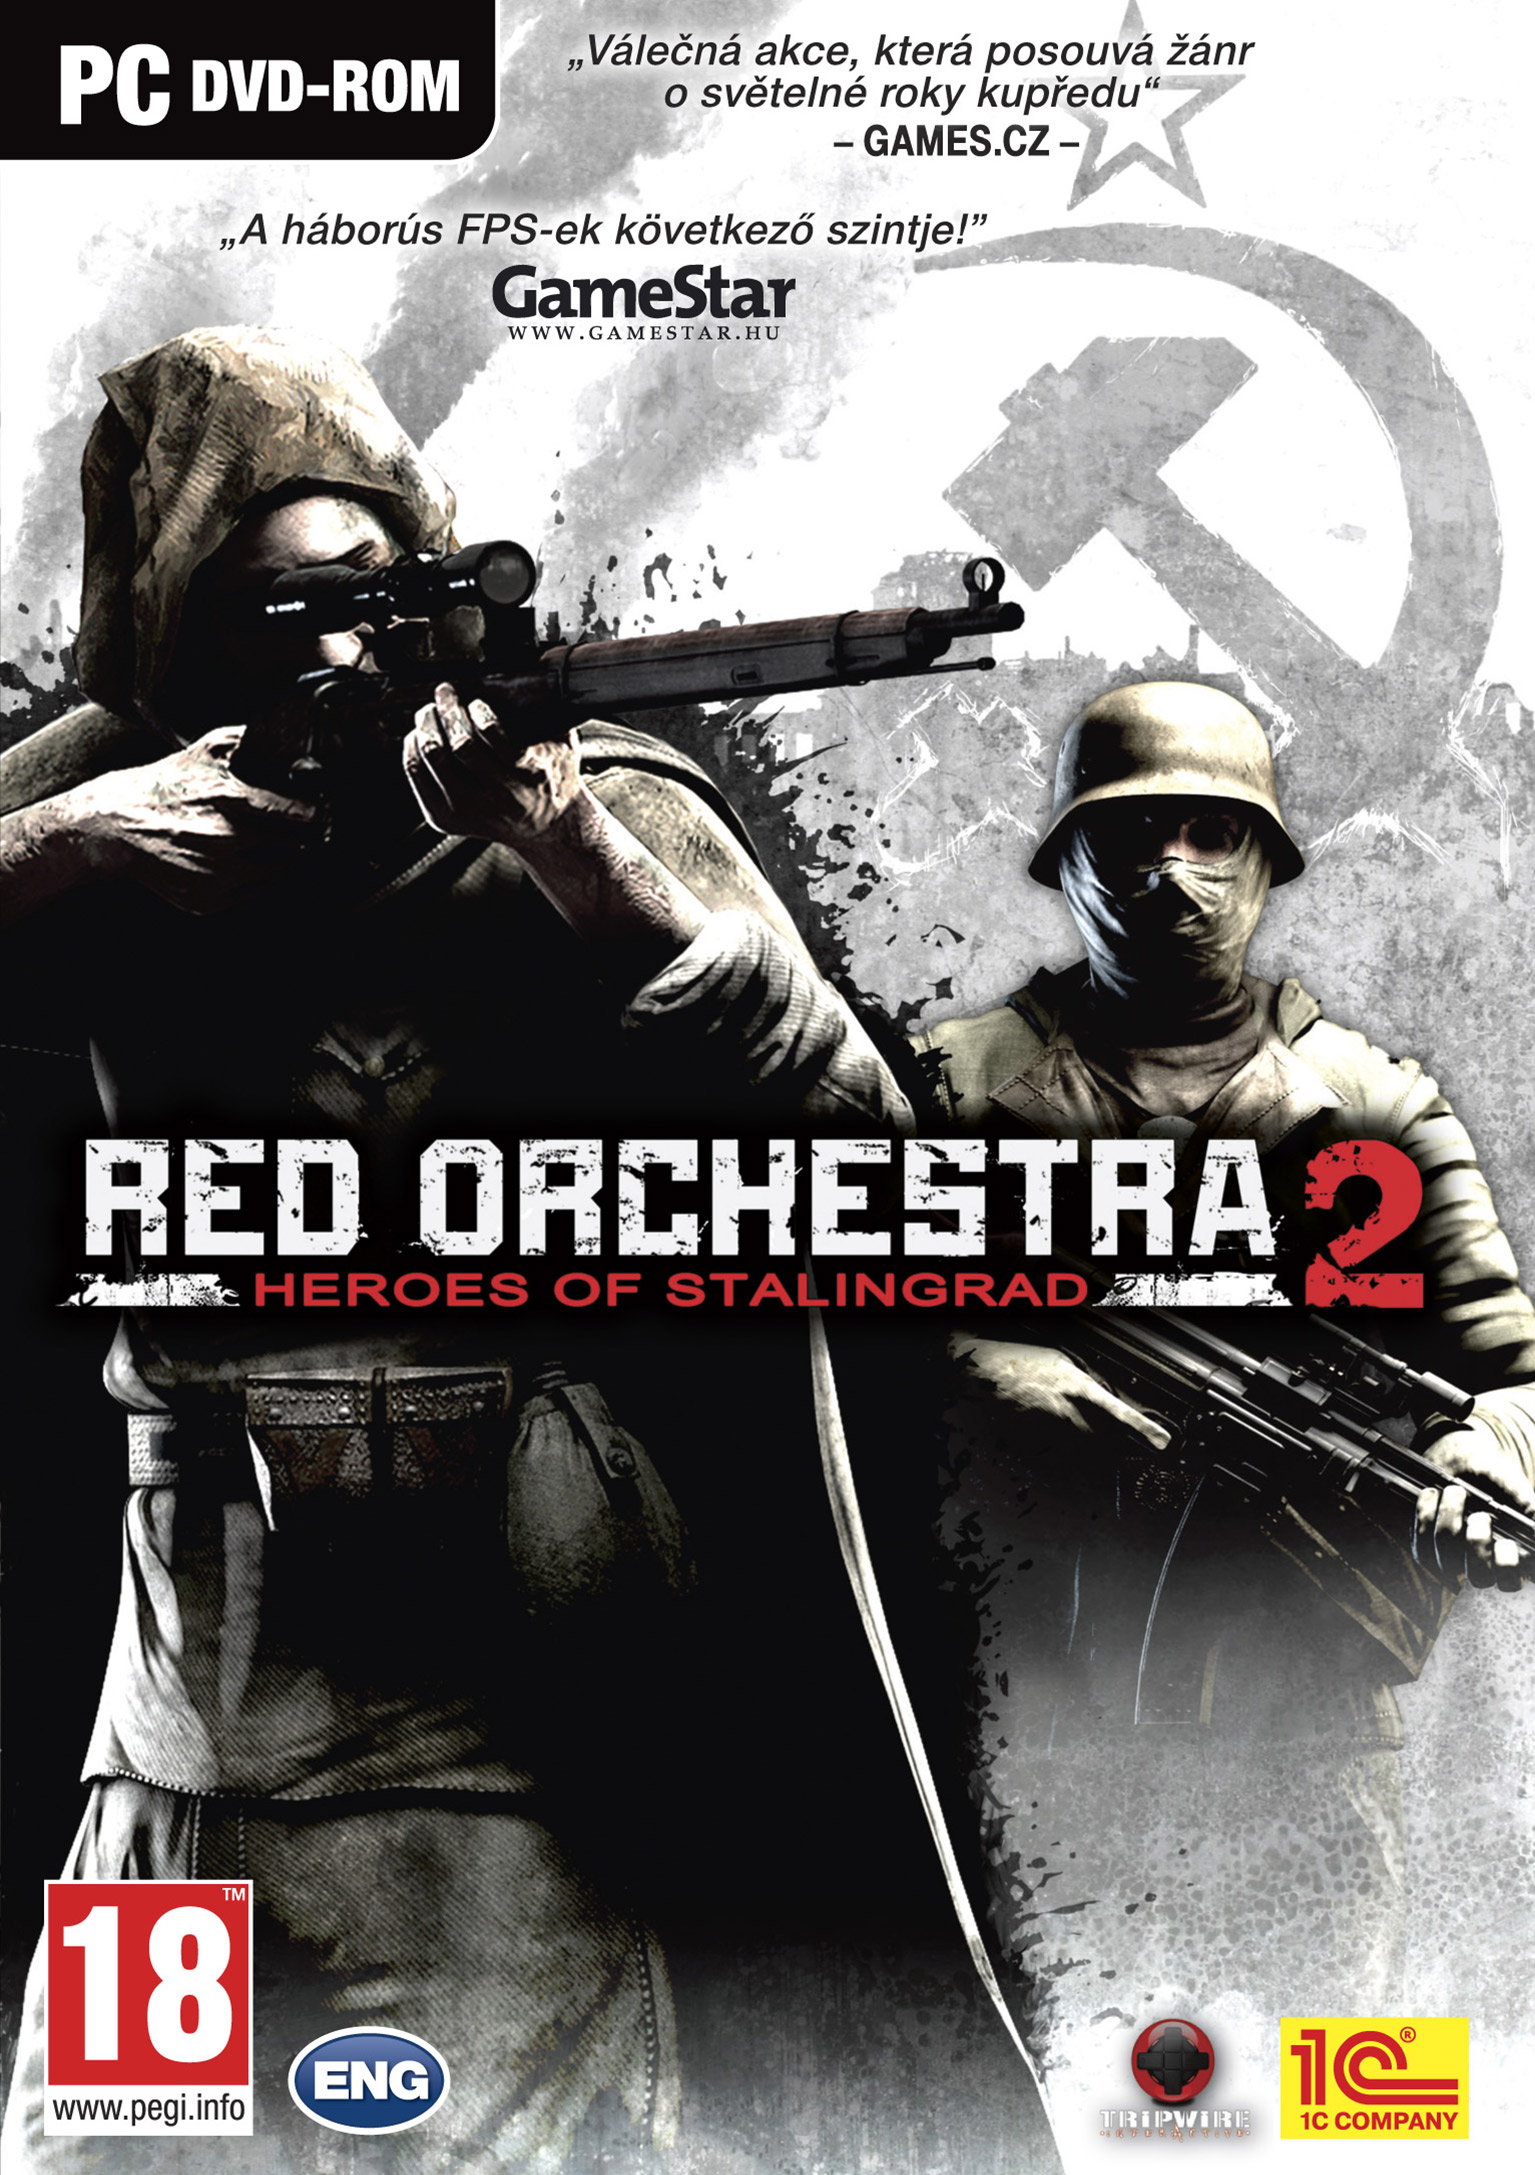 Red Orchestra 2: Heroes of Stalingrad - pedn DVD obal